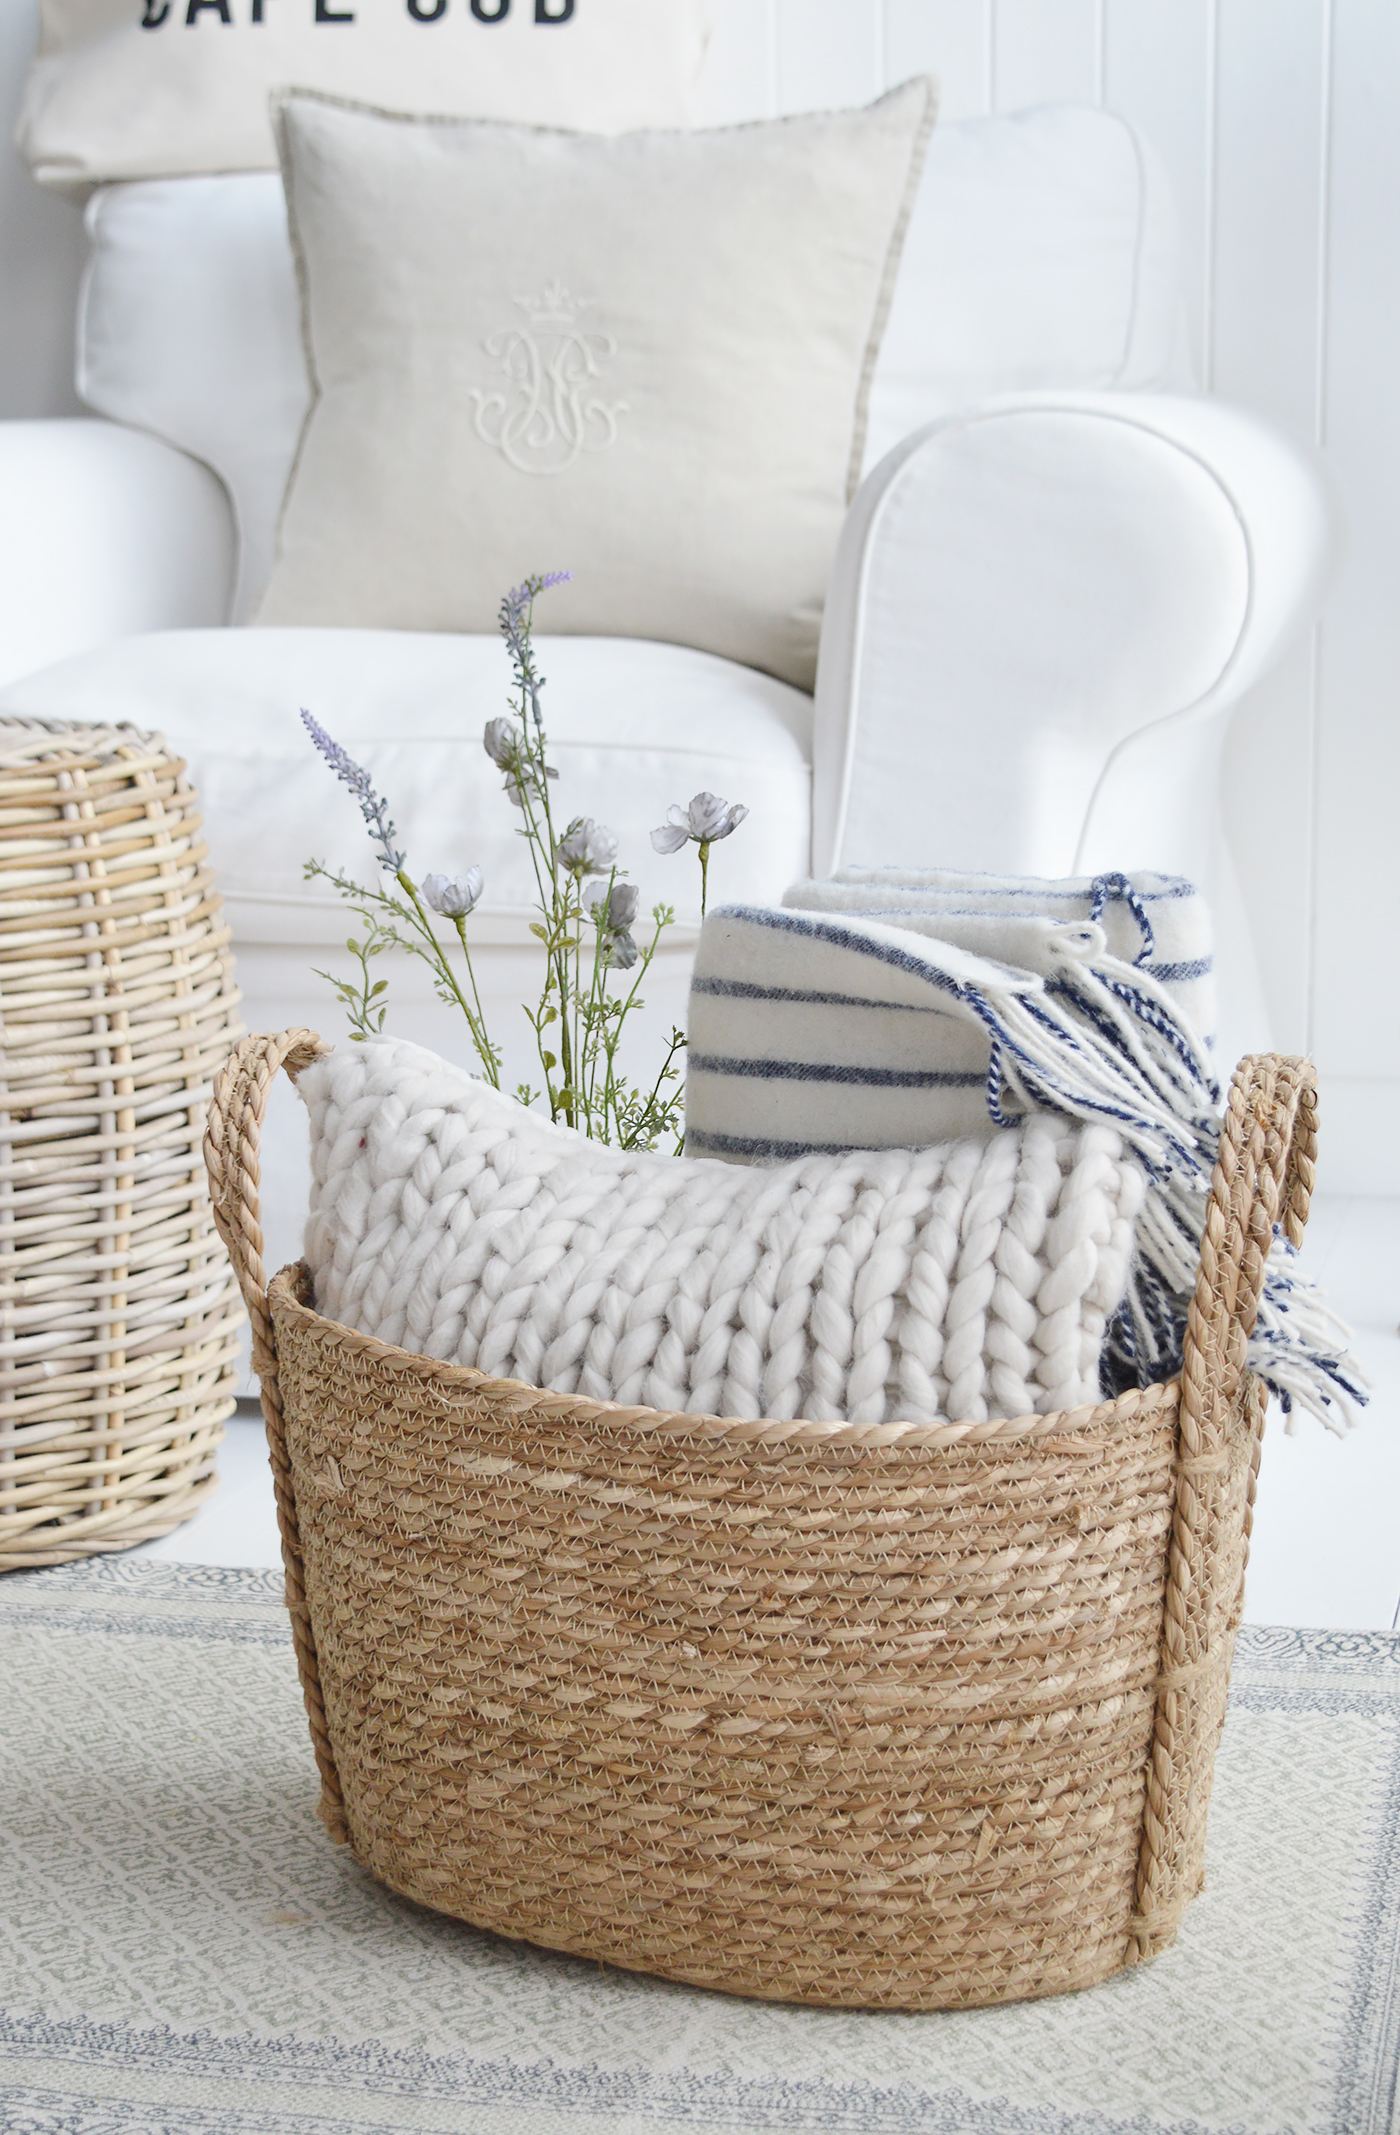 The artificial blue rose spray with cushions and Sudbury throw in the fall River basket for a relaxed New England feel